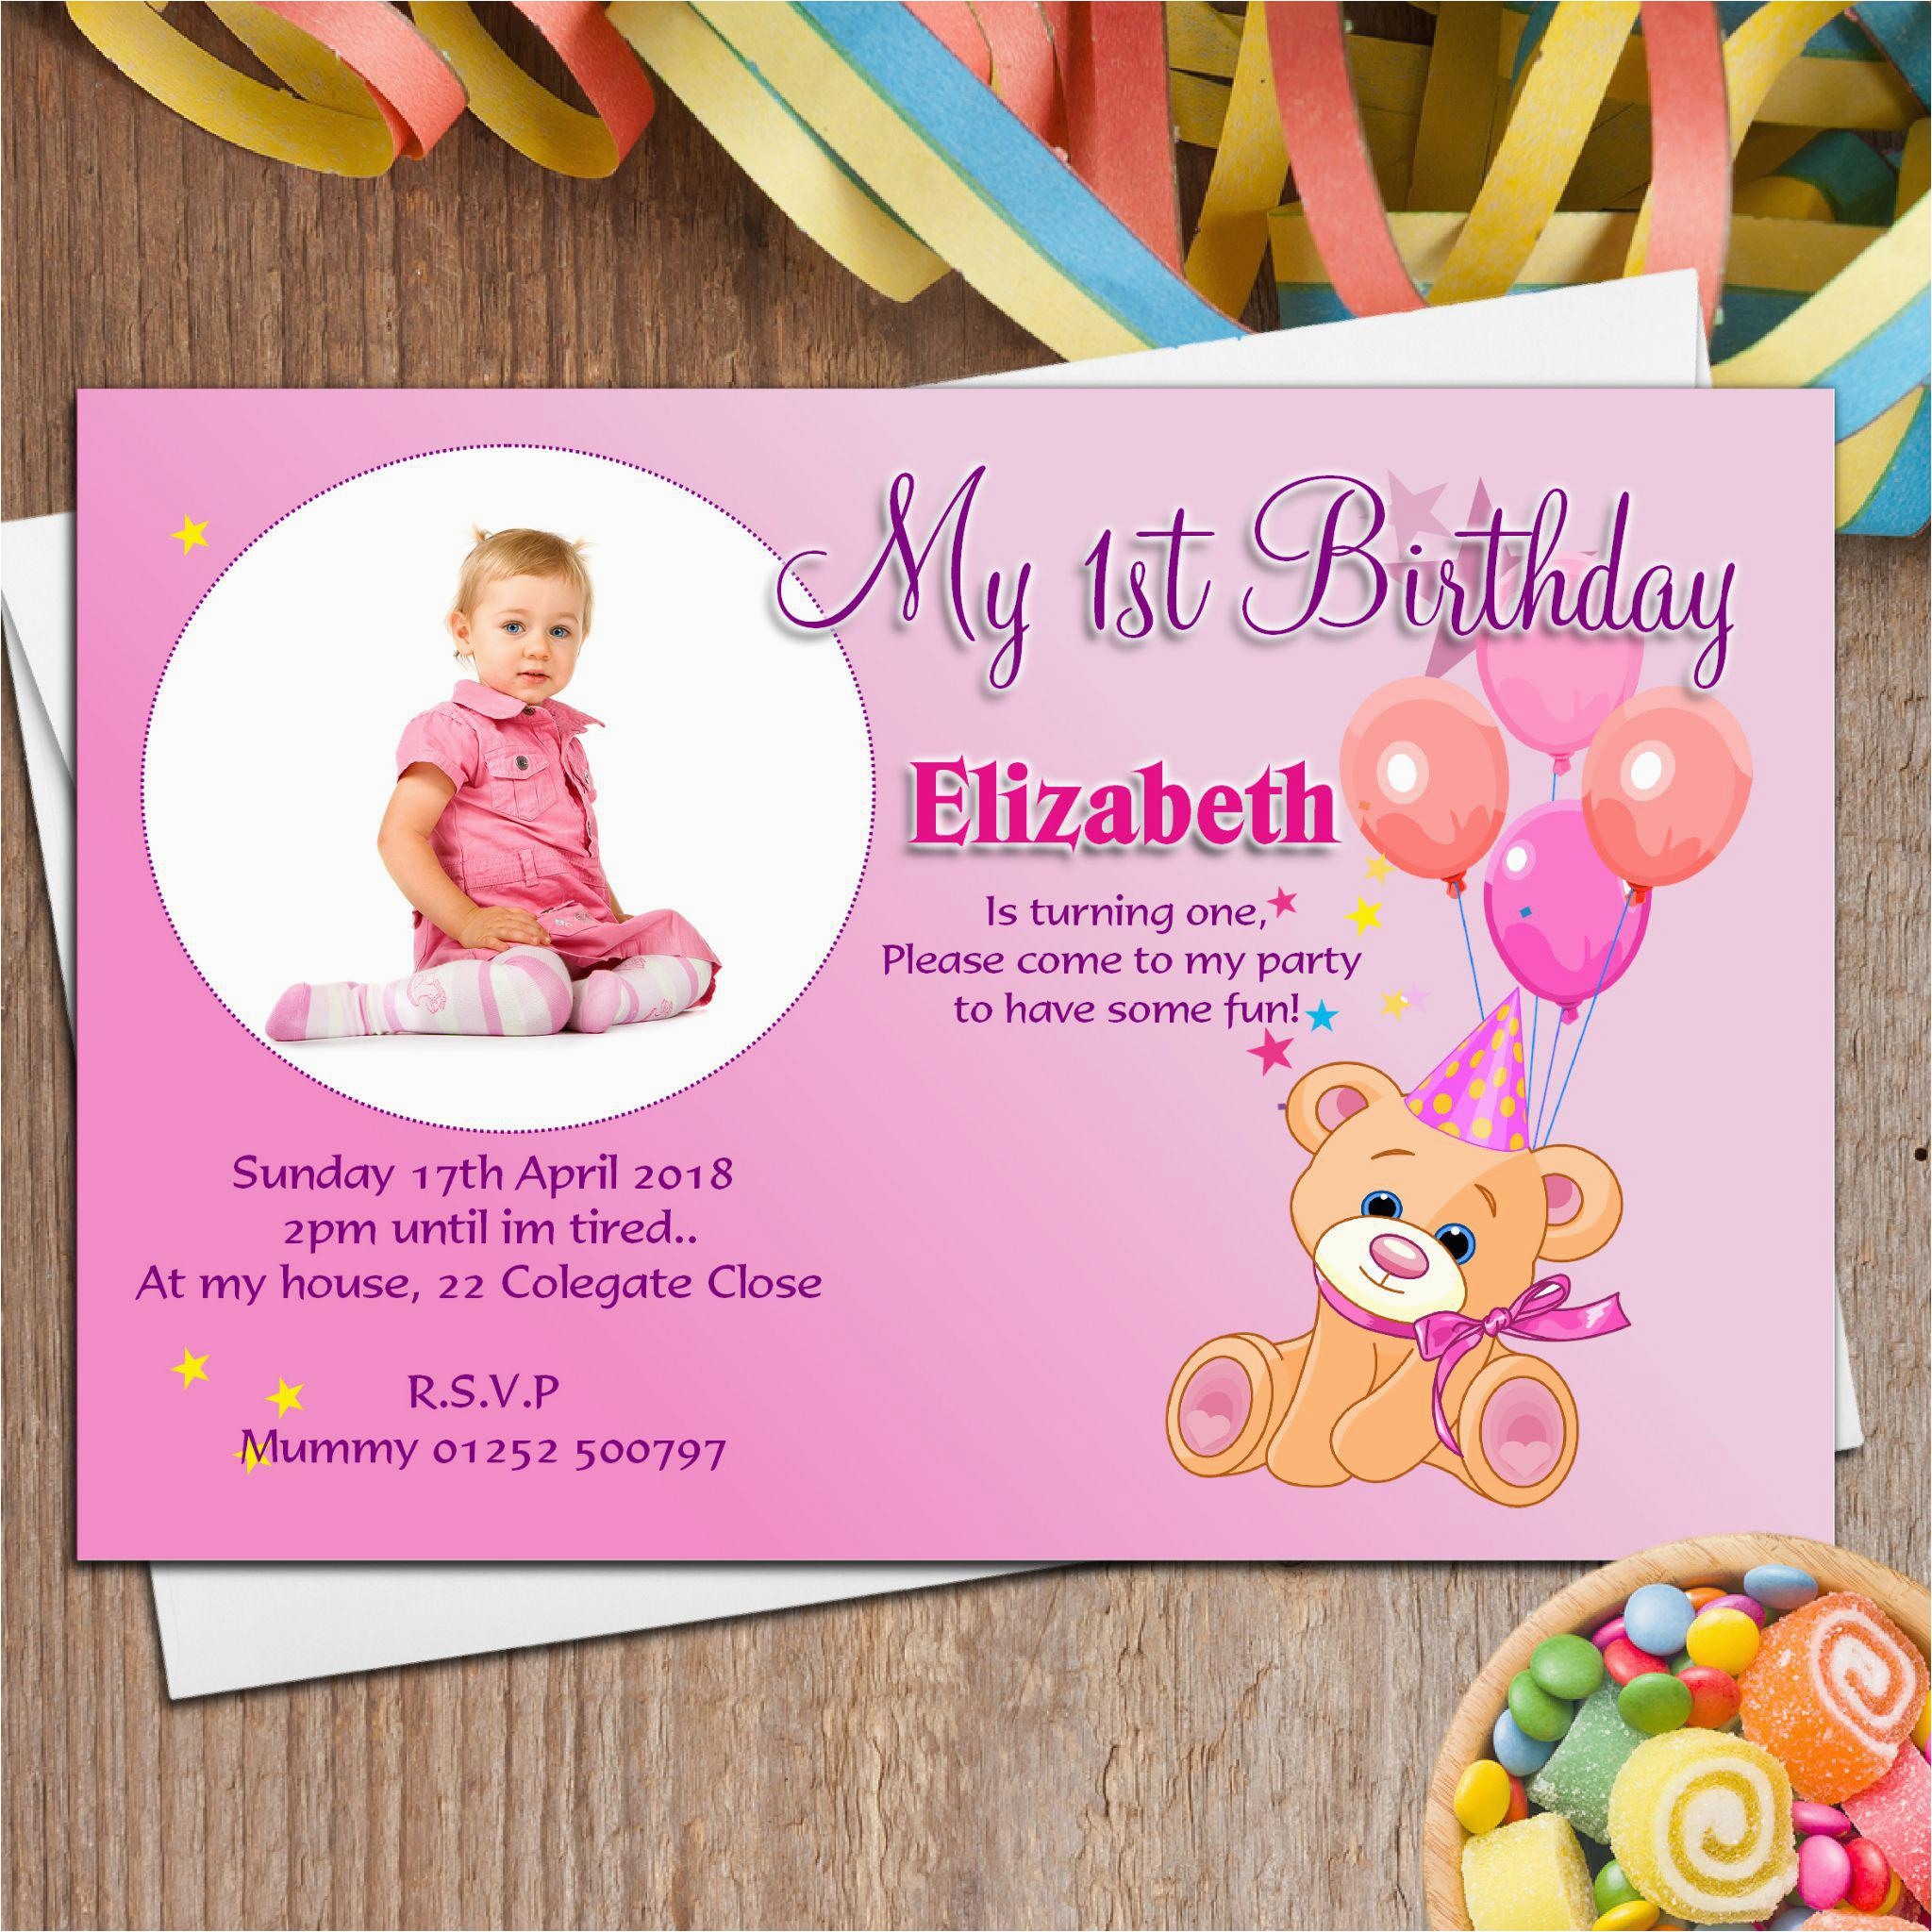 Personalized Invites For Birthday 20 Birthday Invitations Cards Sample 